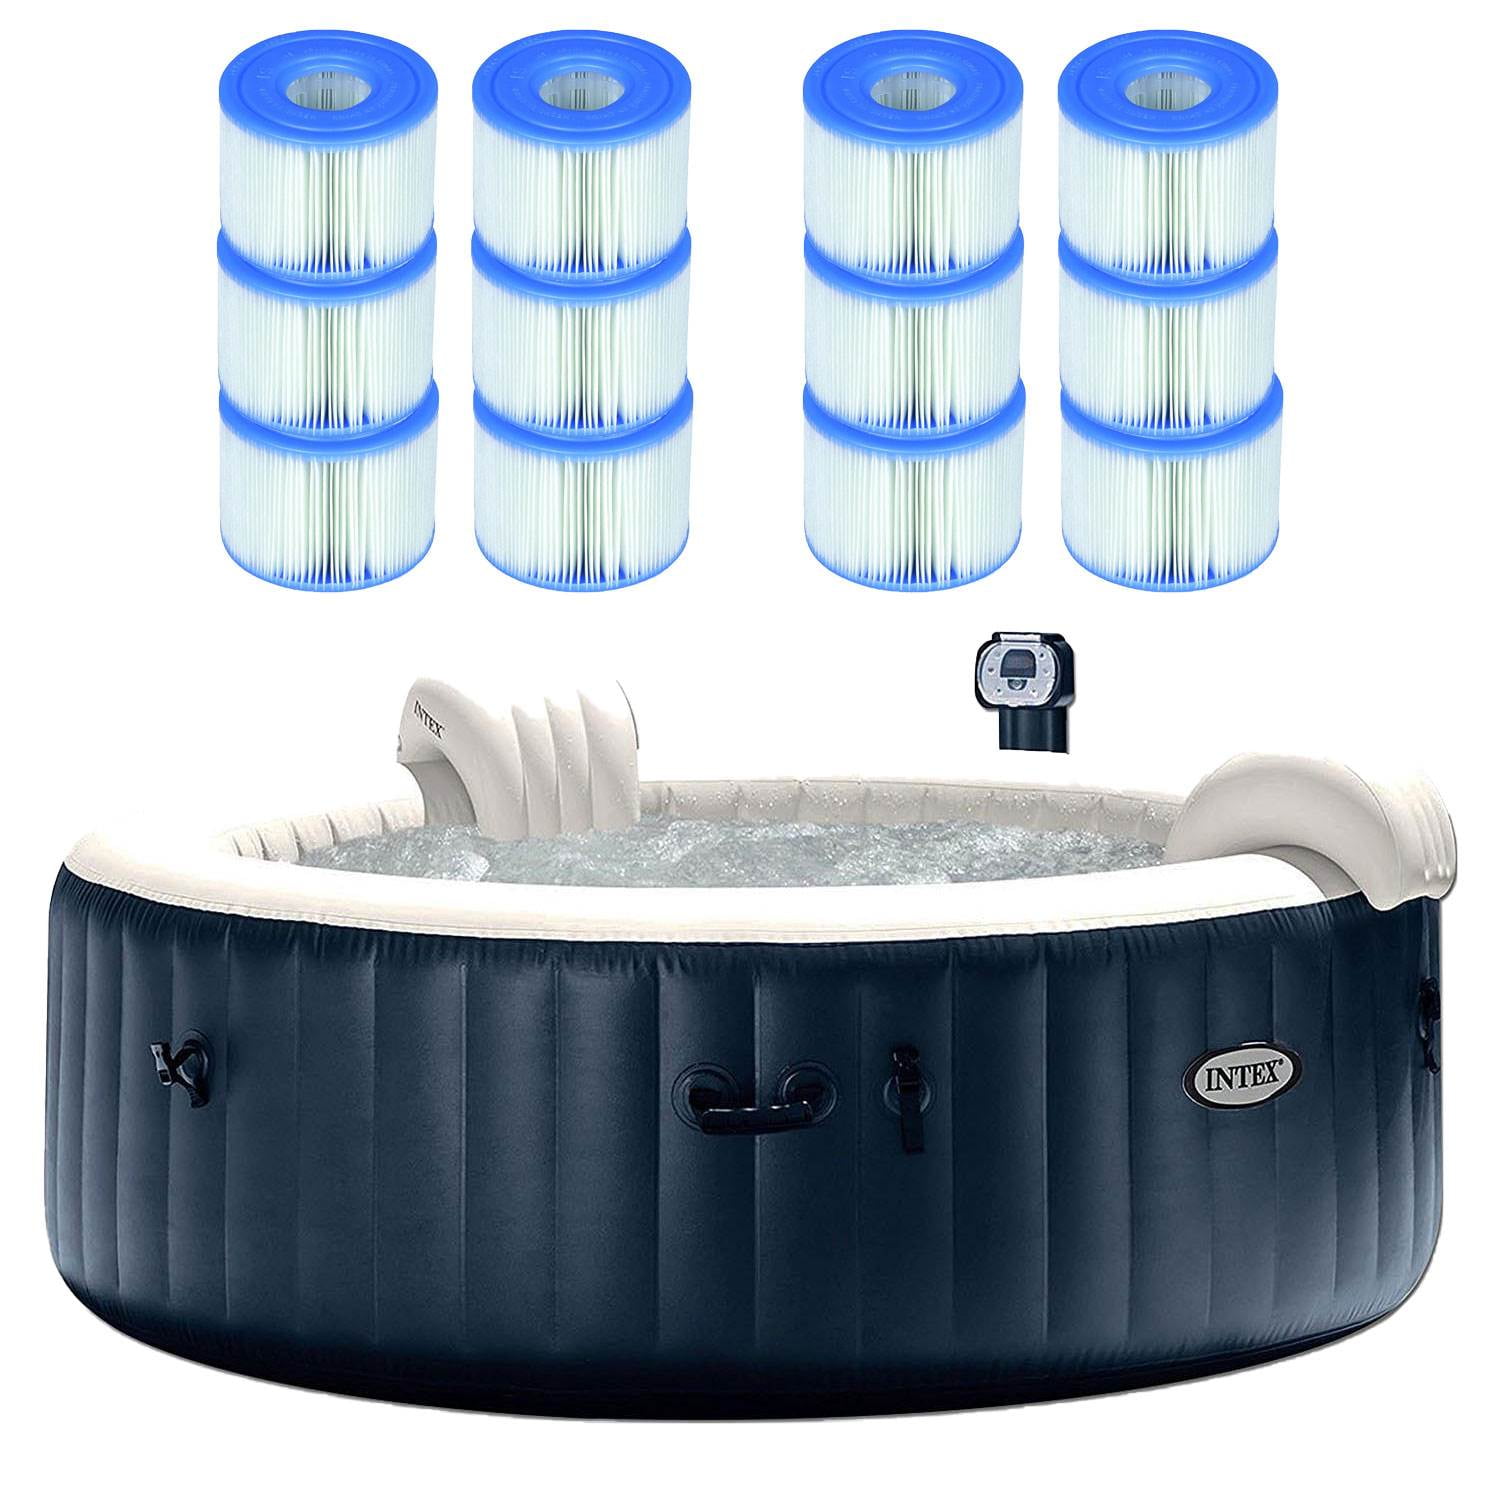 Intex PureSpa Inflatable 6 Person Hot Tub with 12 Type S1 Filter Cartridges